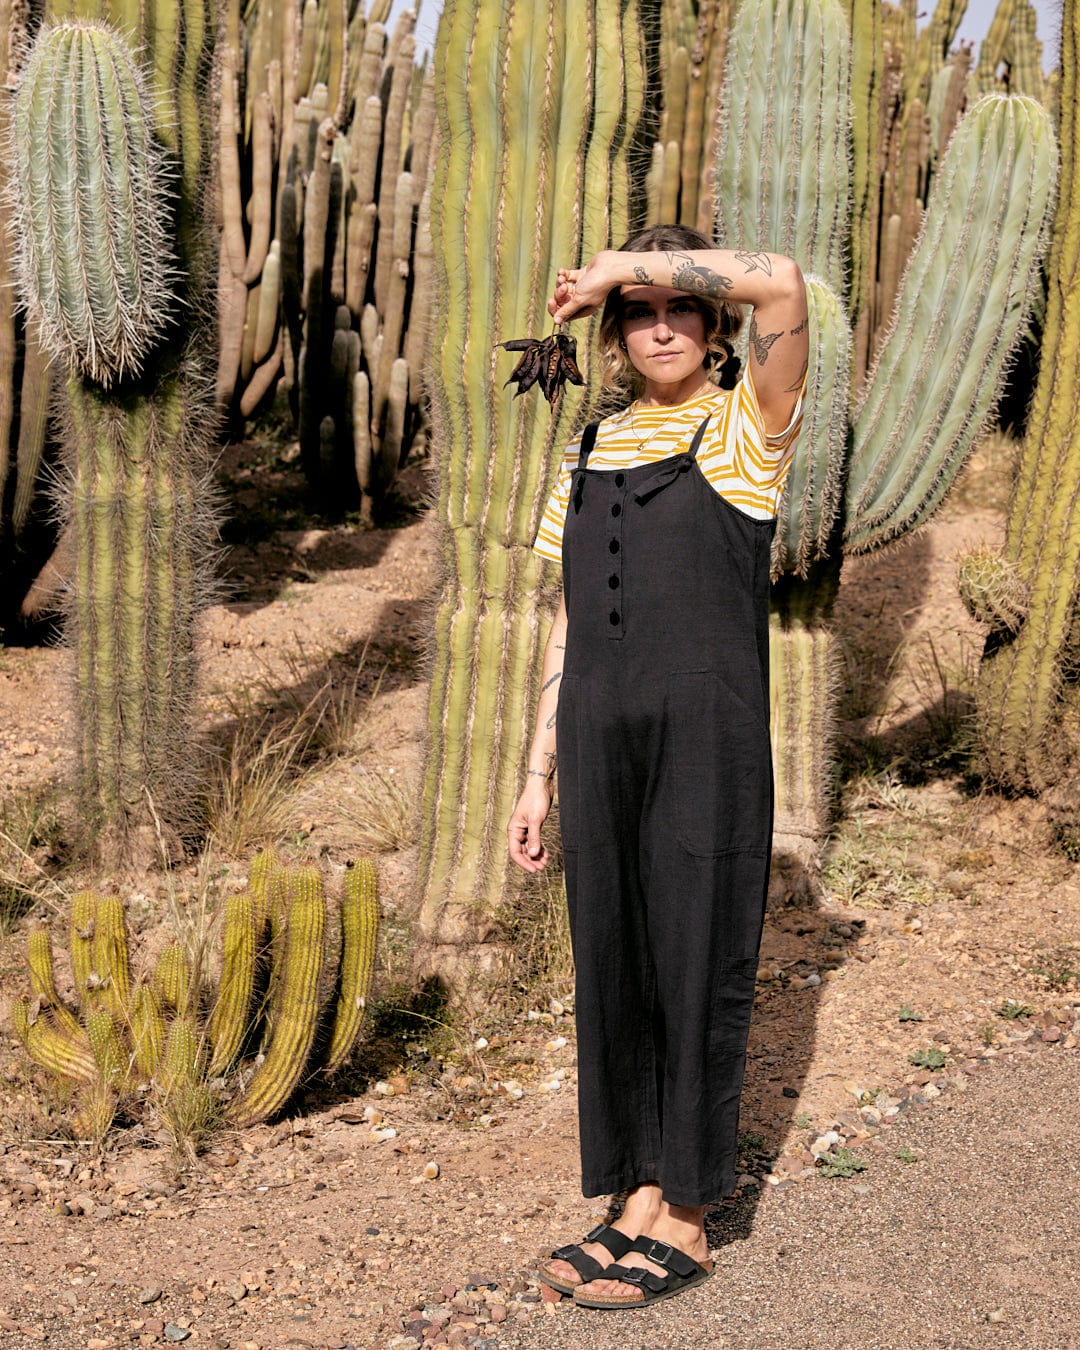 A person in a Nancy - Womens Jumpsuit - Dark Grey from Saltrock with adjustable tie straps and a yellow striped shirt stands among tall cacti, shielding their eyes from the sun with one hand.